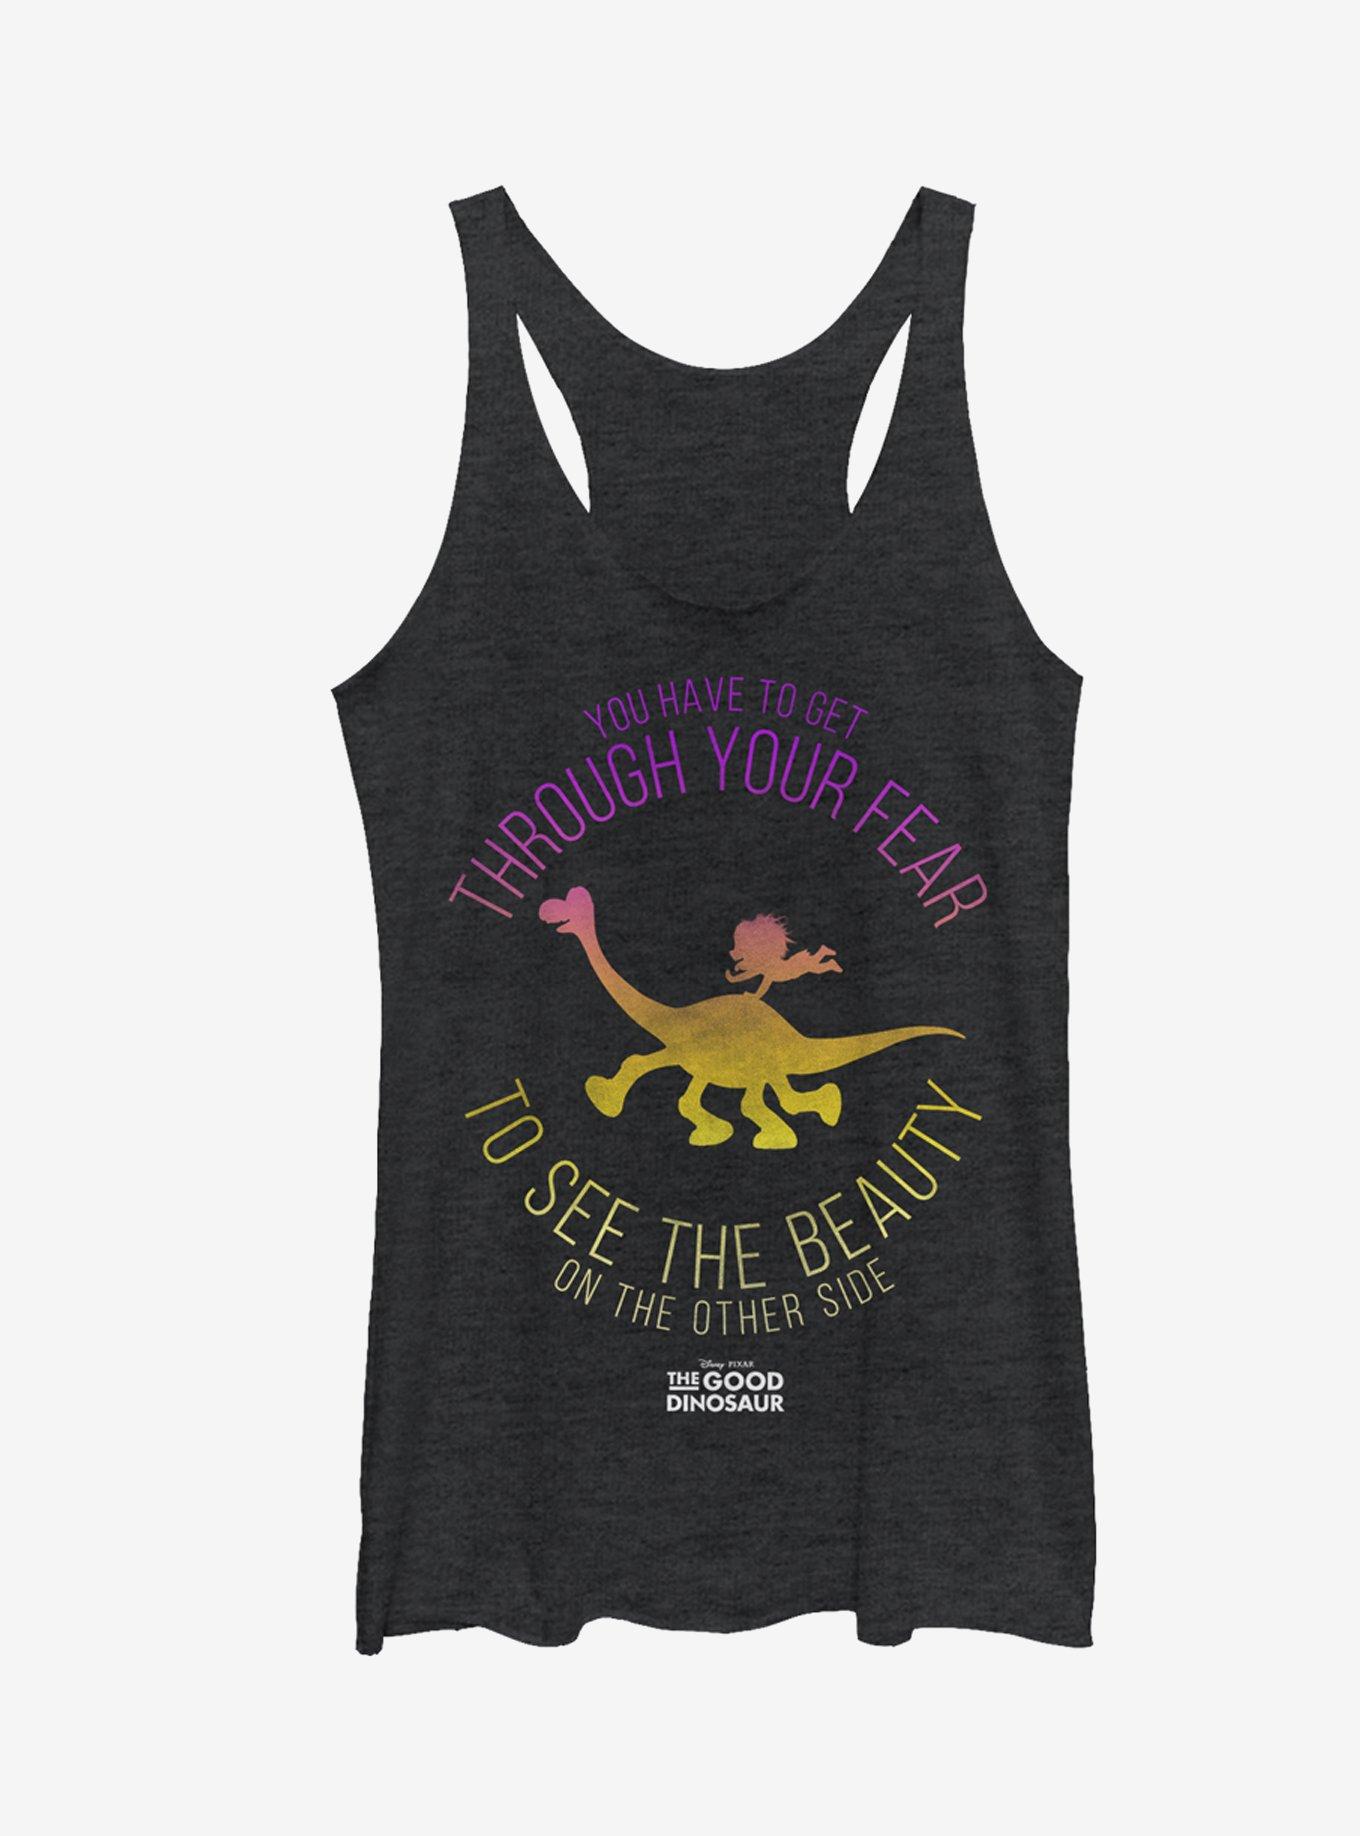 Disney Pixar The Good Dinosaur See the Beauty on the Other Side Girls Tanks, , hi-res